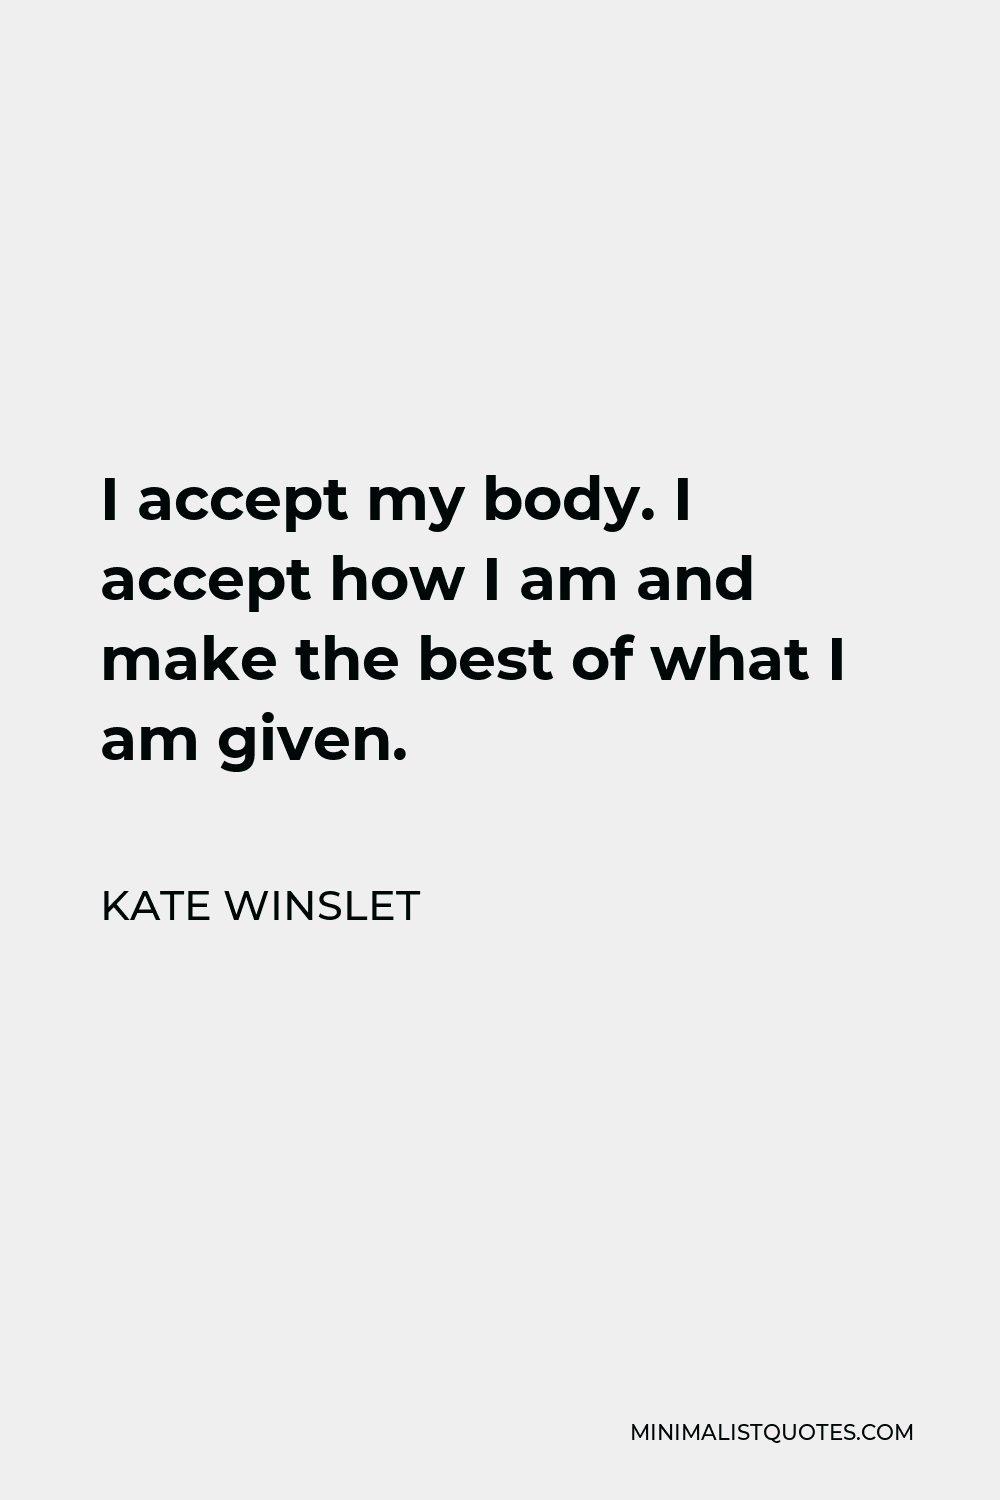 Kate Winslet Quote - I accept my body. I accept how I am and make the best of what I am given.